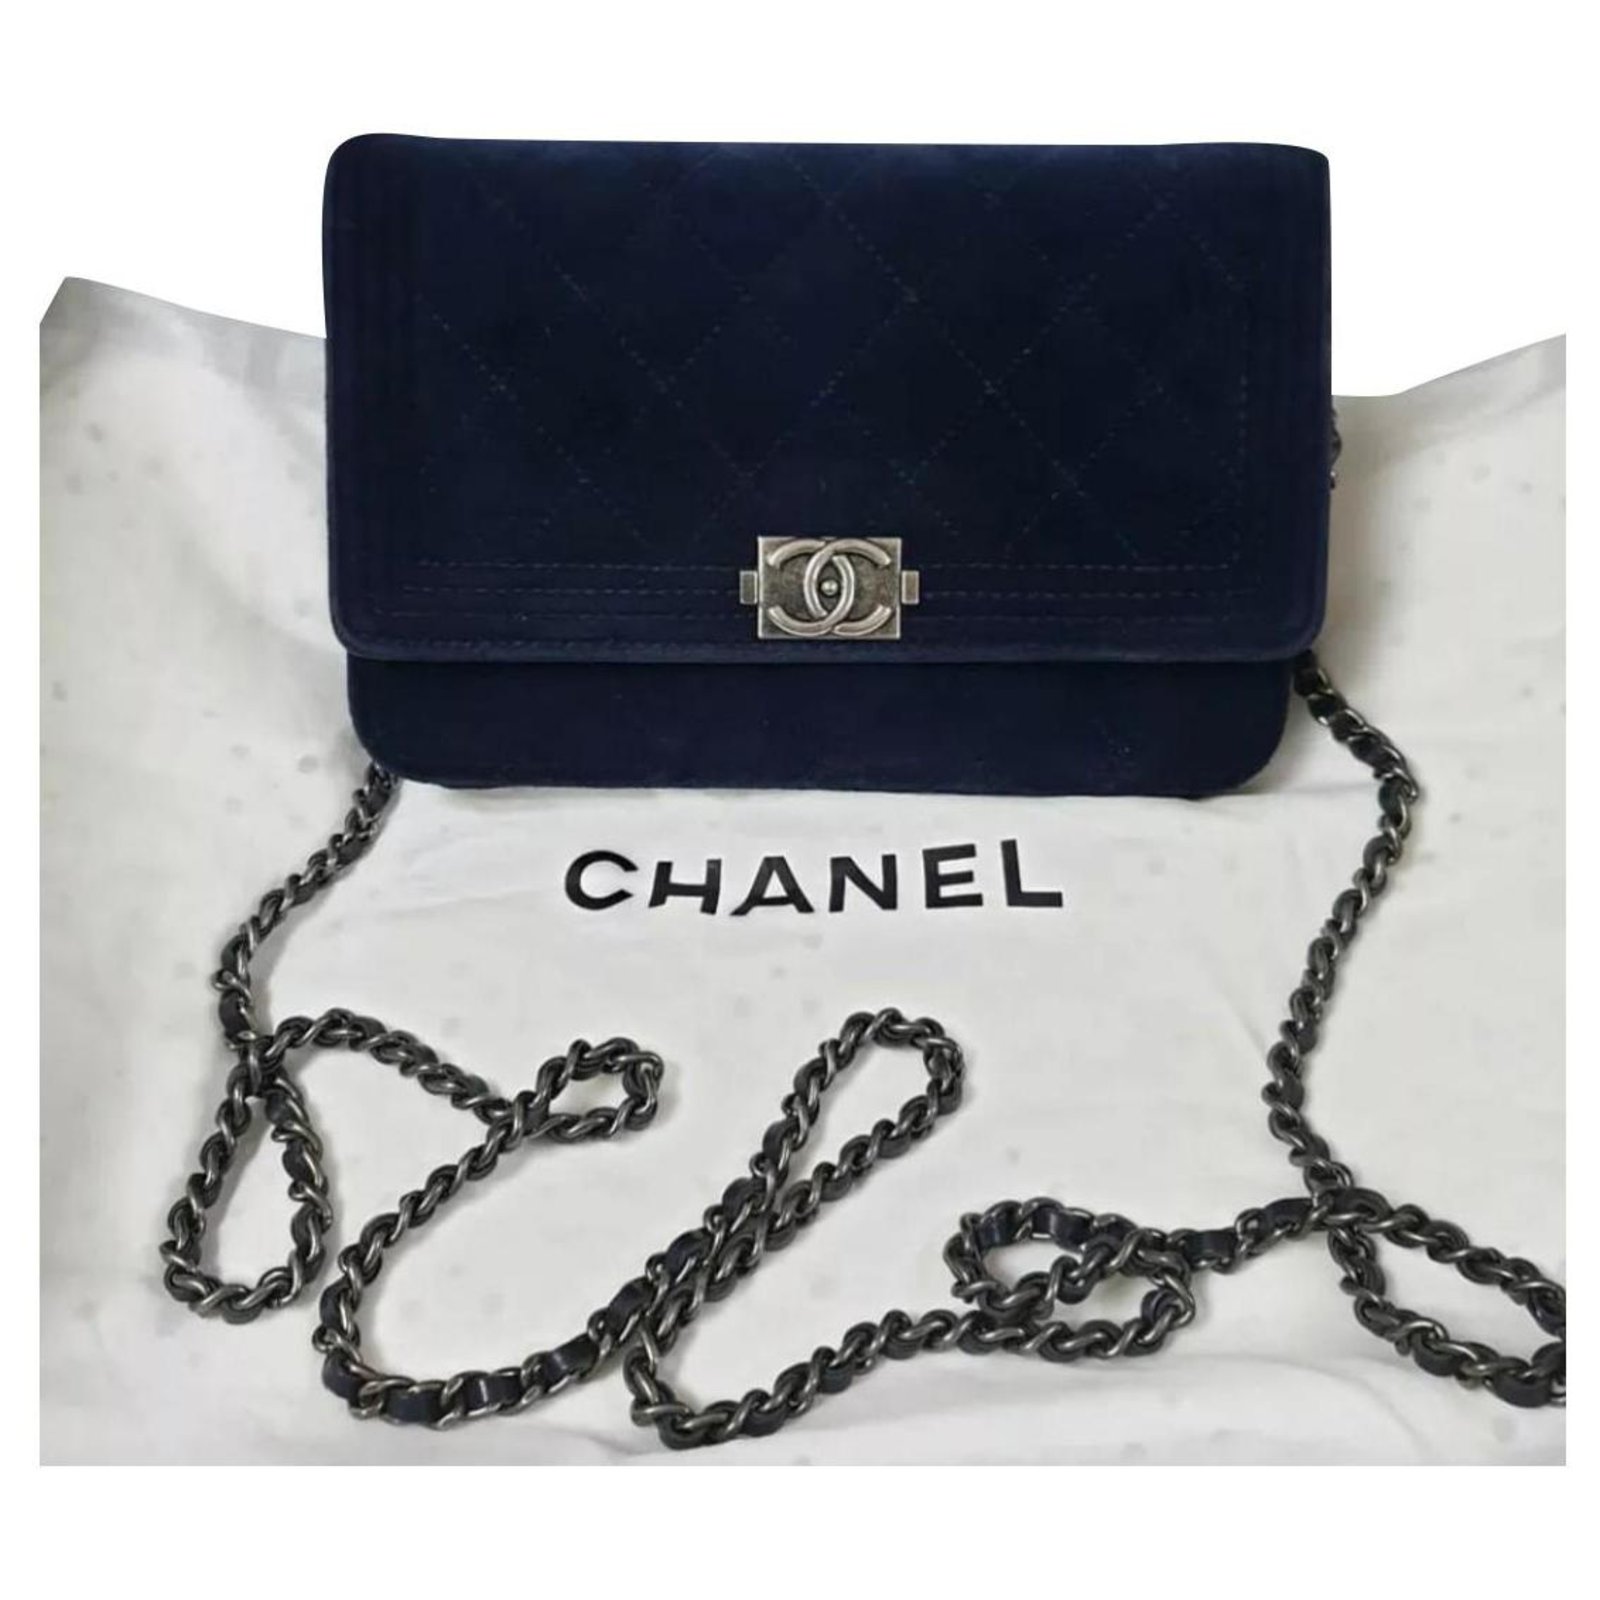 CHANEL, LIGHT BLUE BOY GM BAG IN GRAINED LEATHER, 2011/2012, Handbags and  Accessories, 2020